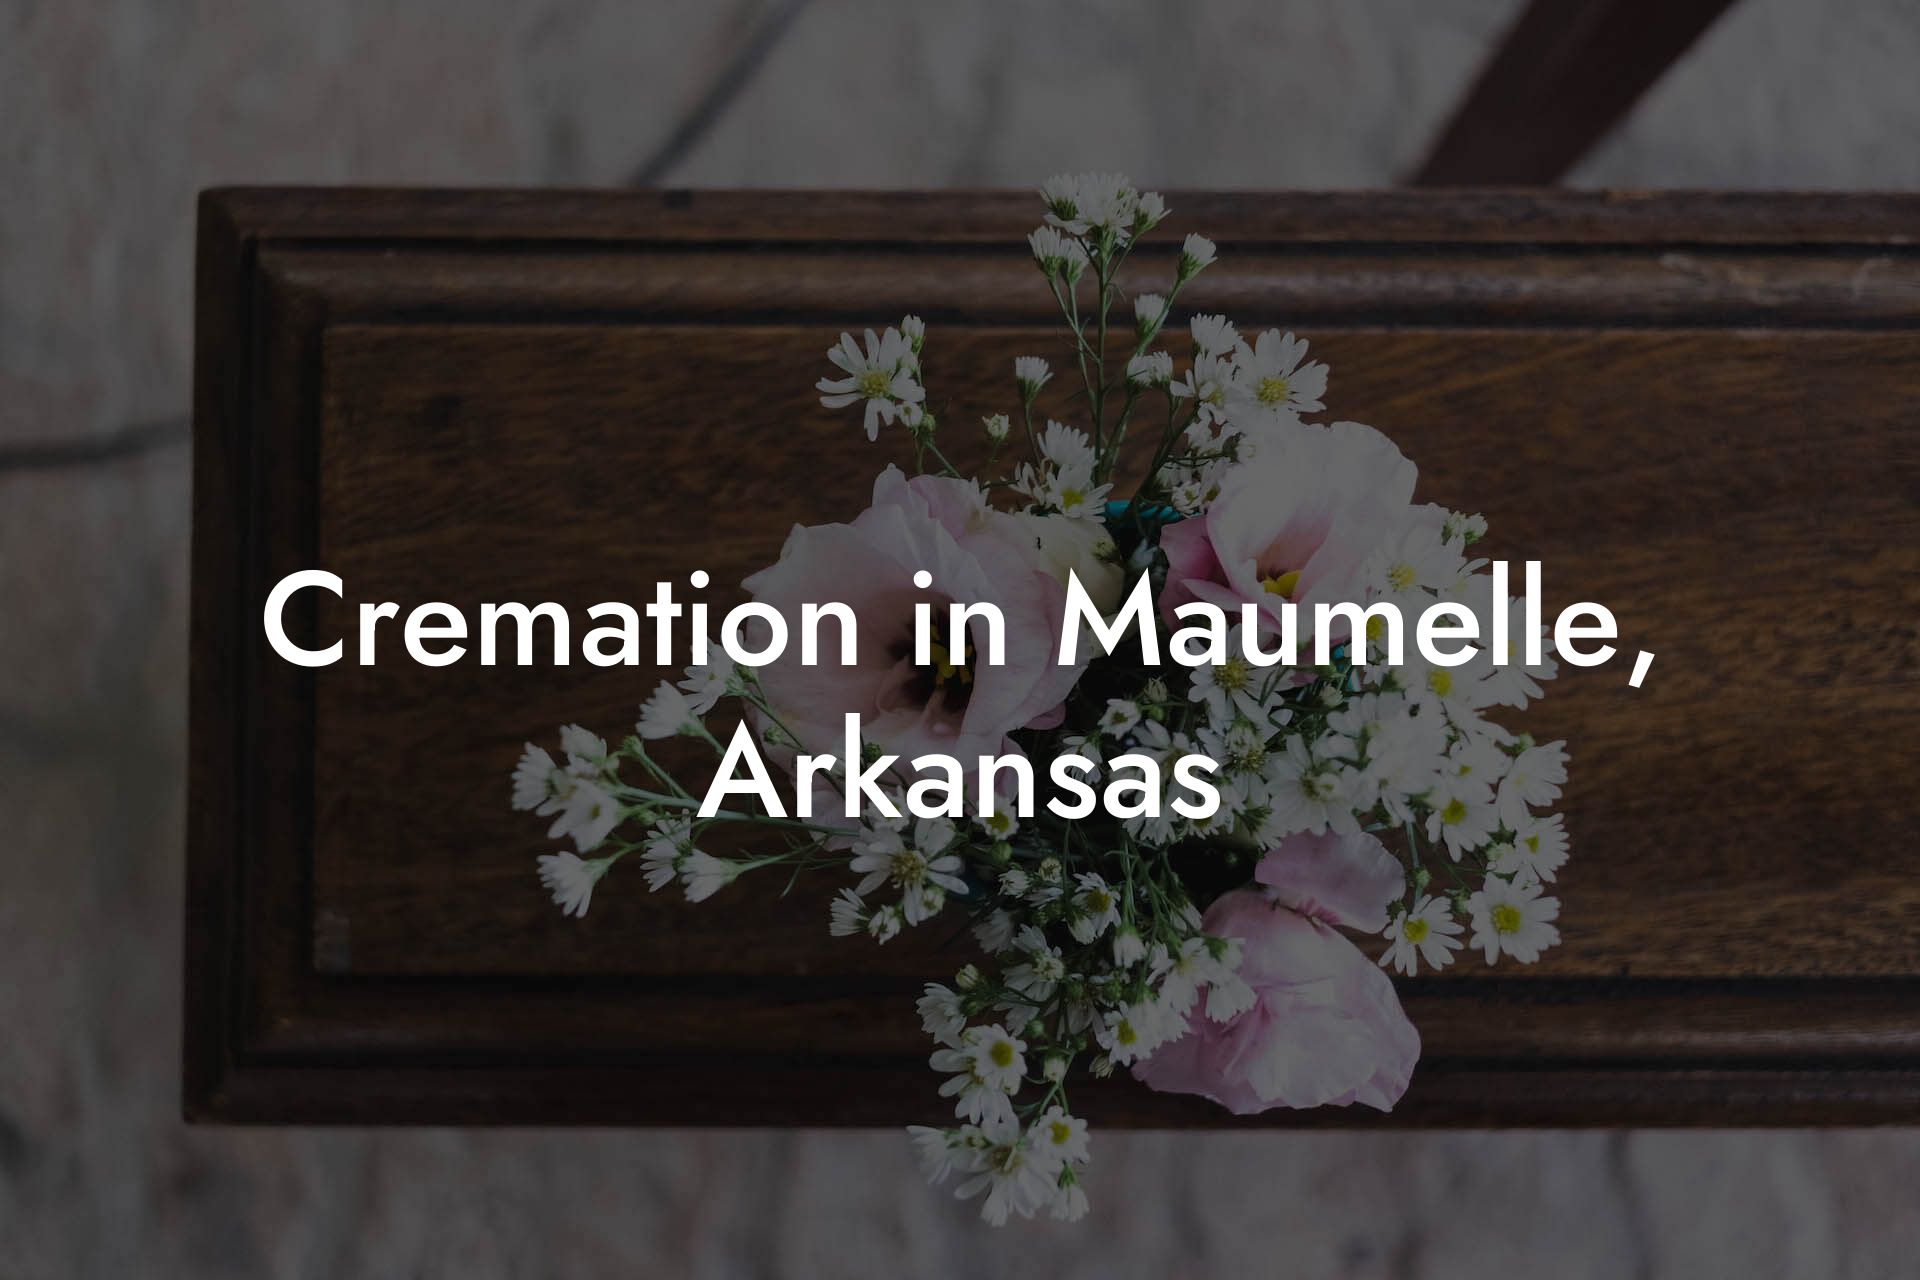 Cremation in Maumelle, Arkansas